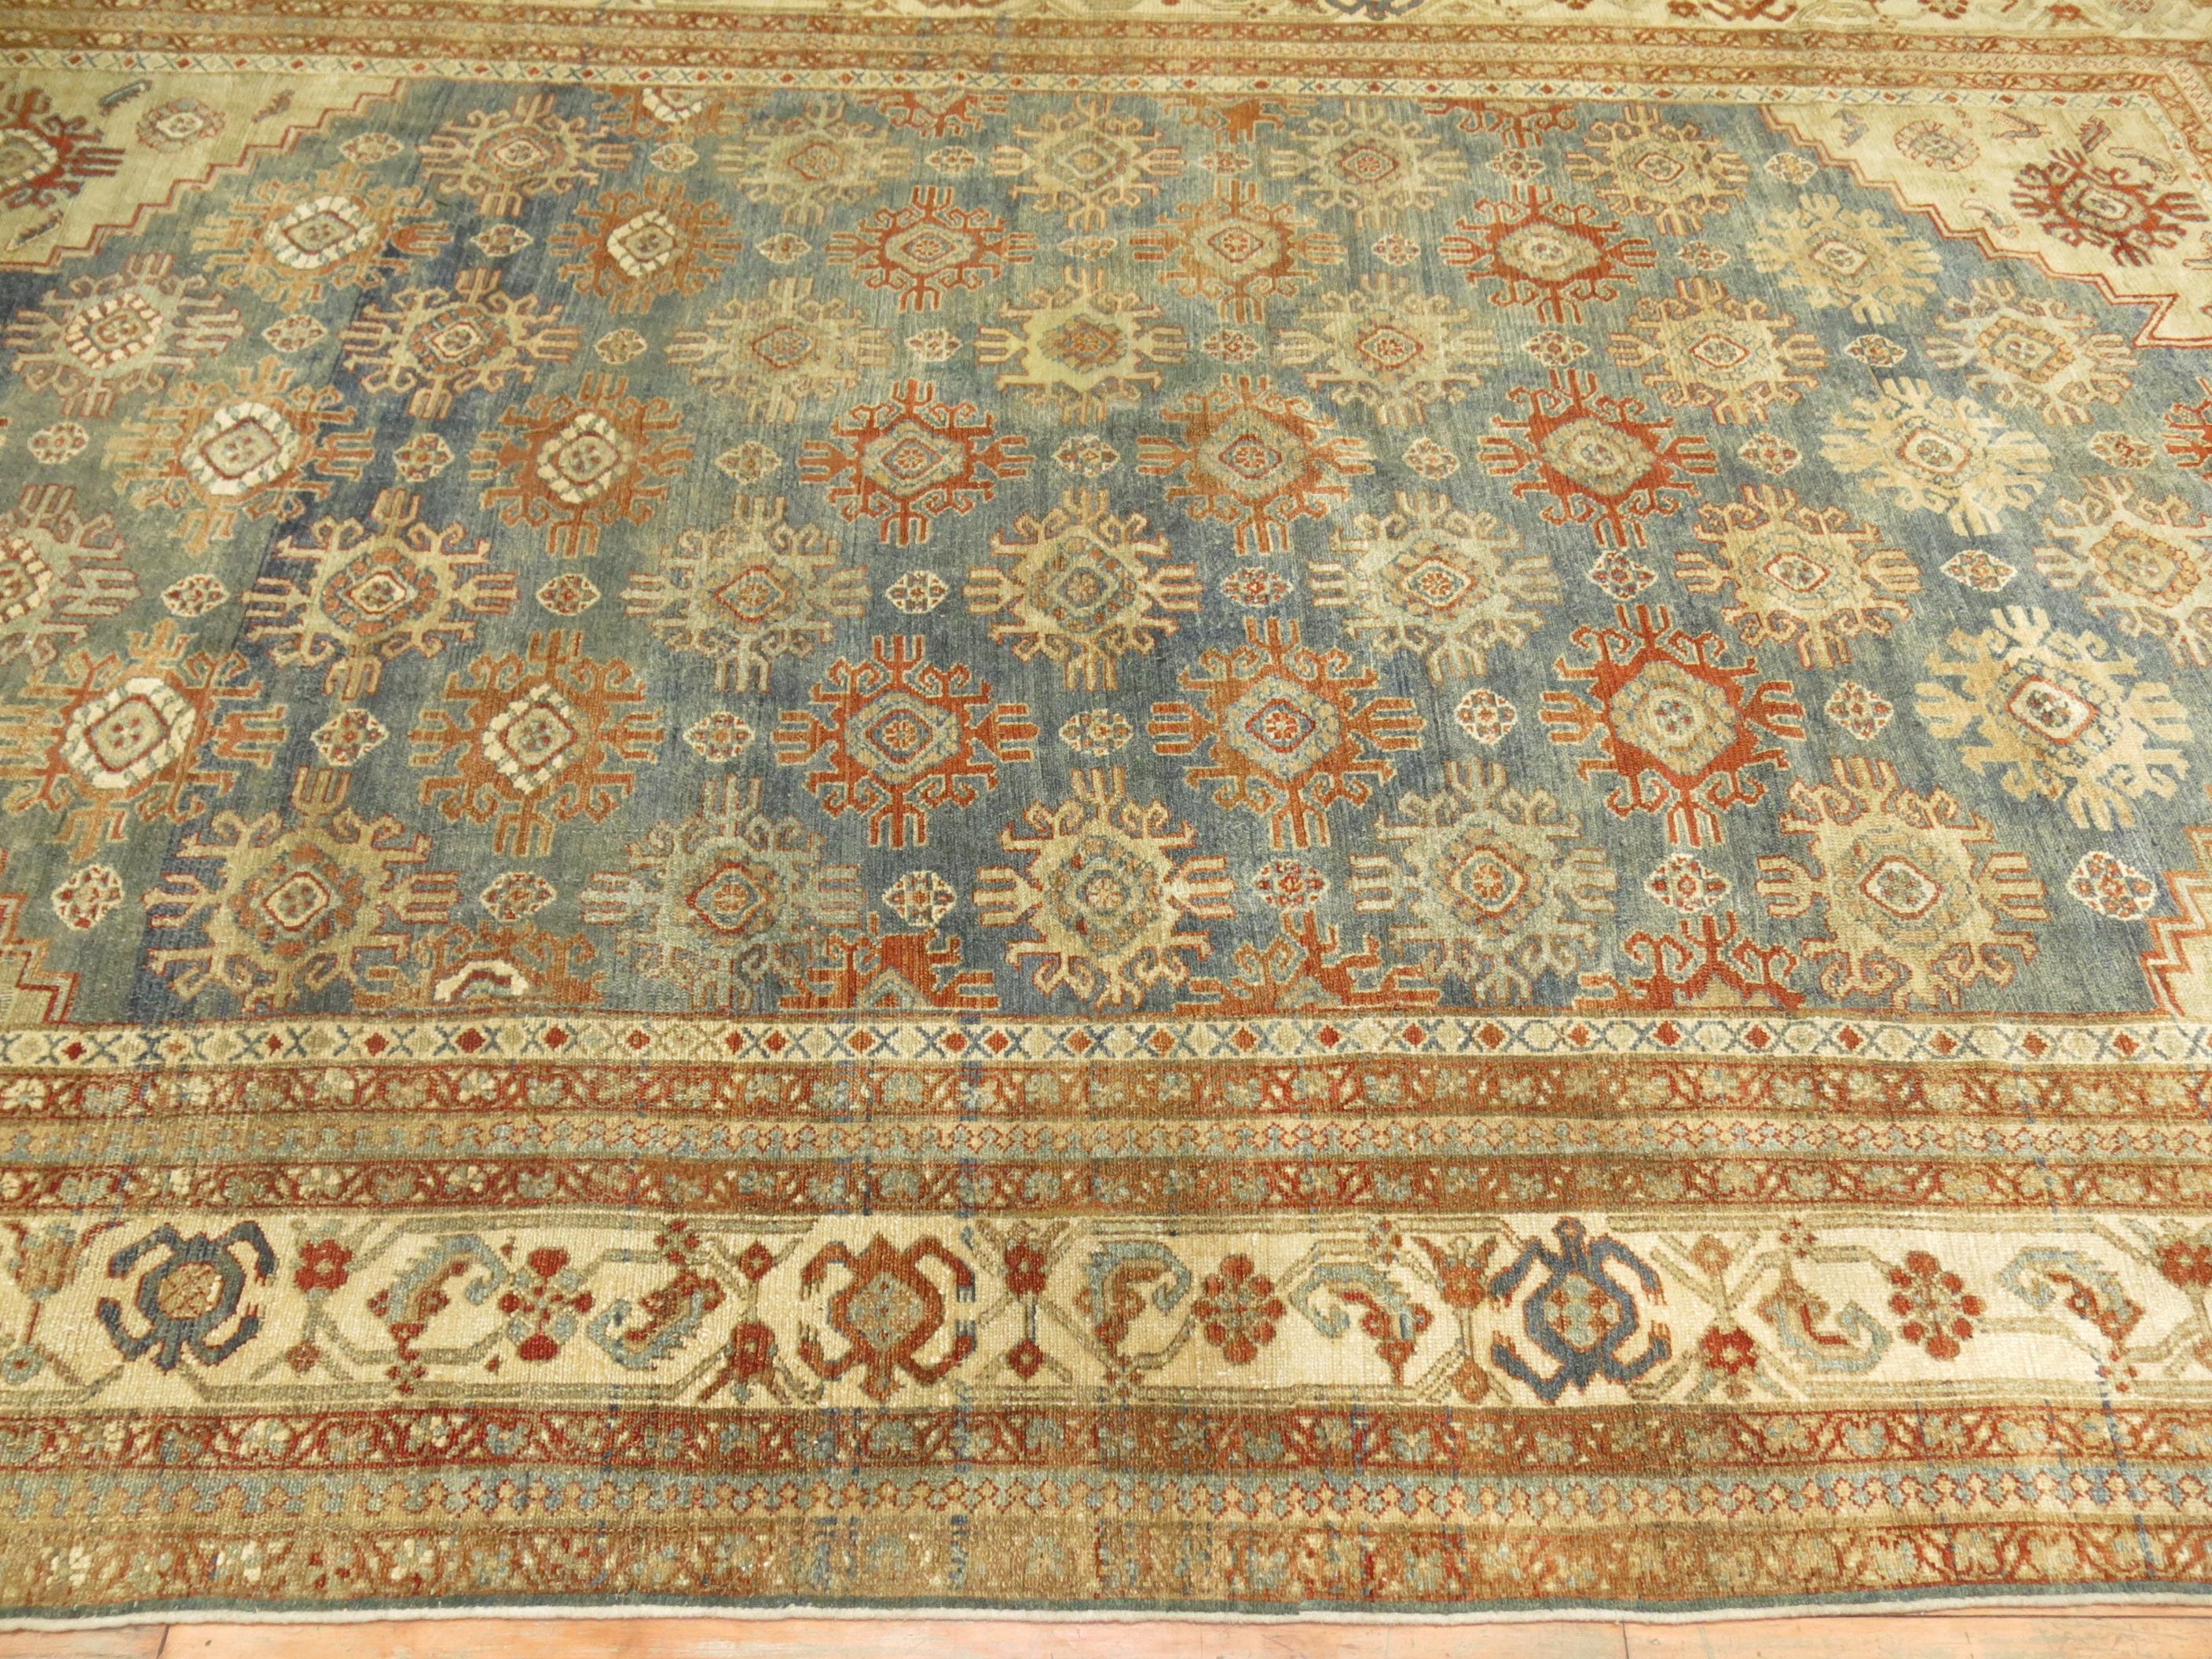 An early 20th century highly decorative Persian Malayer room size rug,

circa 1920, measures: 7'10